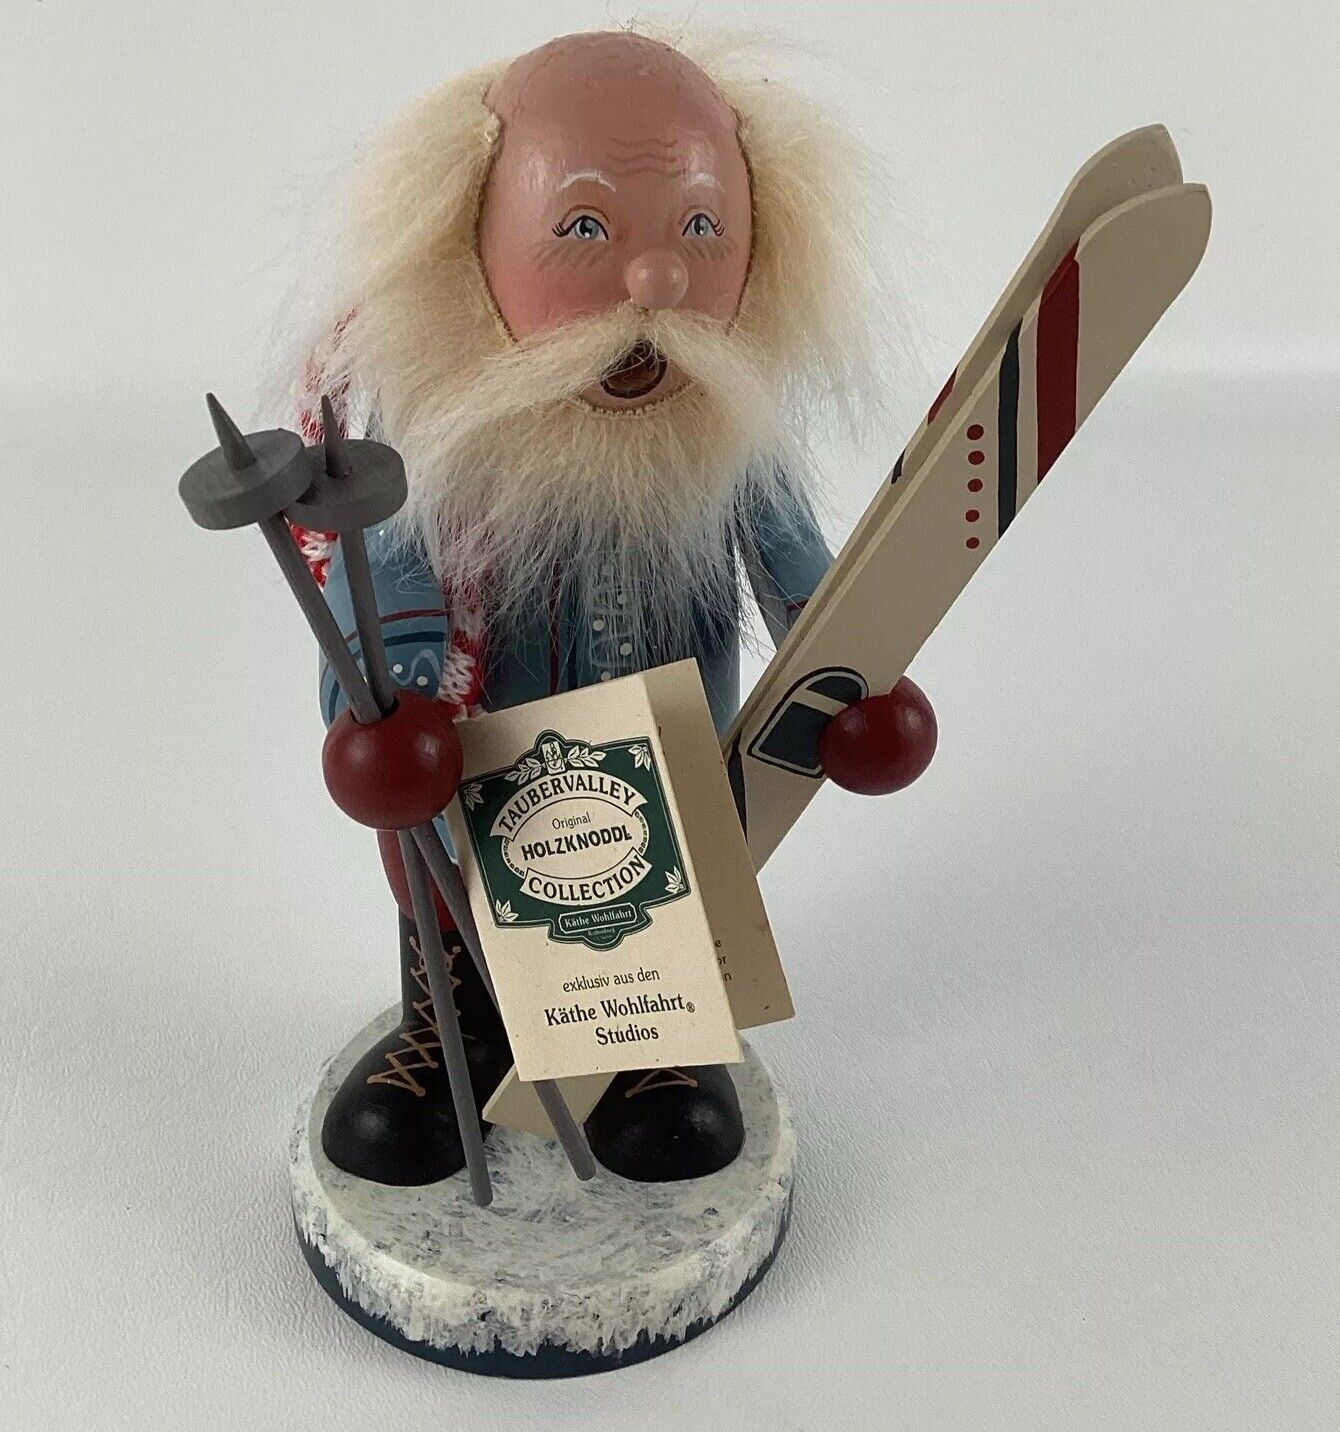 Taubervalley Holzknoddl Collection Skier Incense Smoker Germany Kathe Wohlfahrt